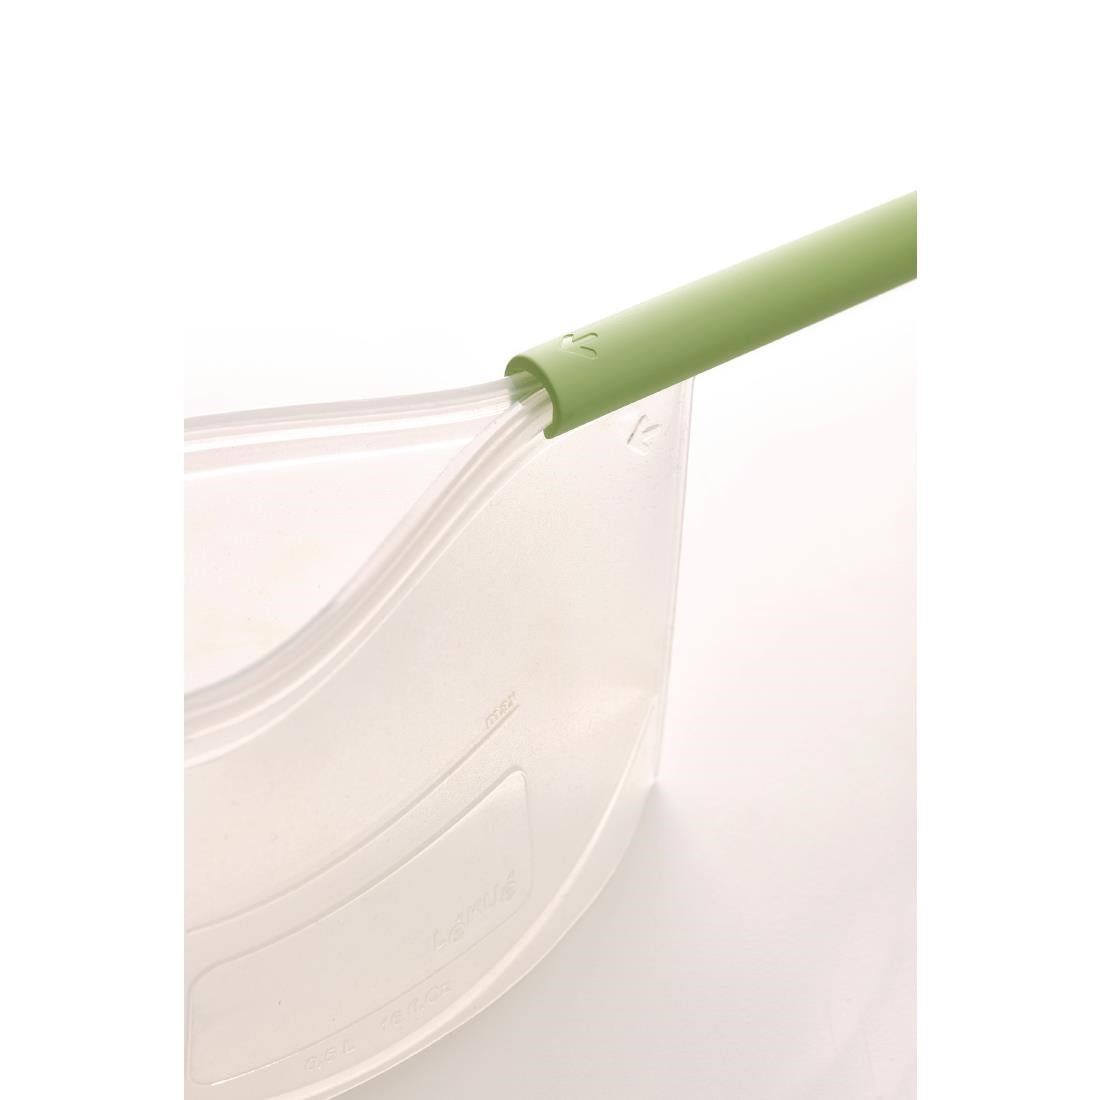 FS289 Lekue Reusable Silicone Food Storage Bag 1 Ltr JD Catering Equipment Solutions Ltd